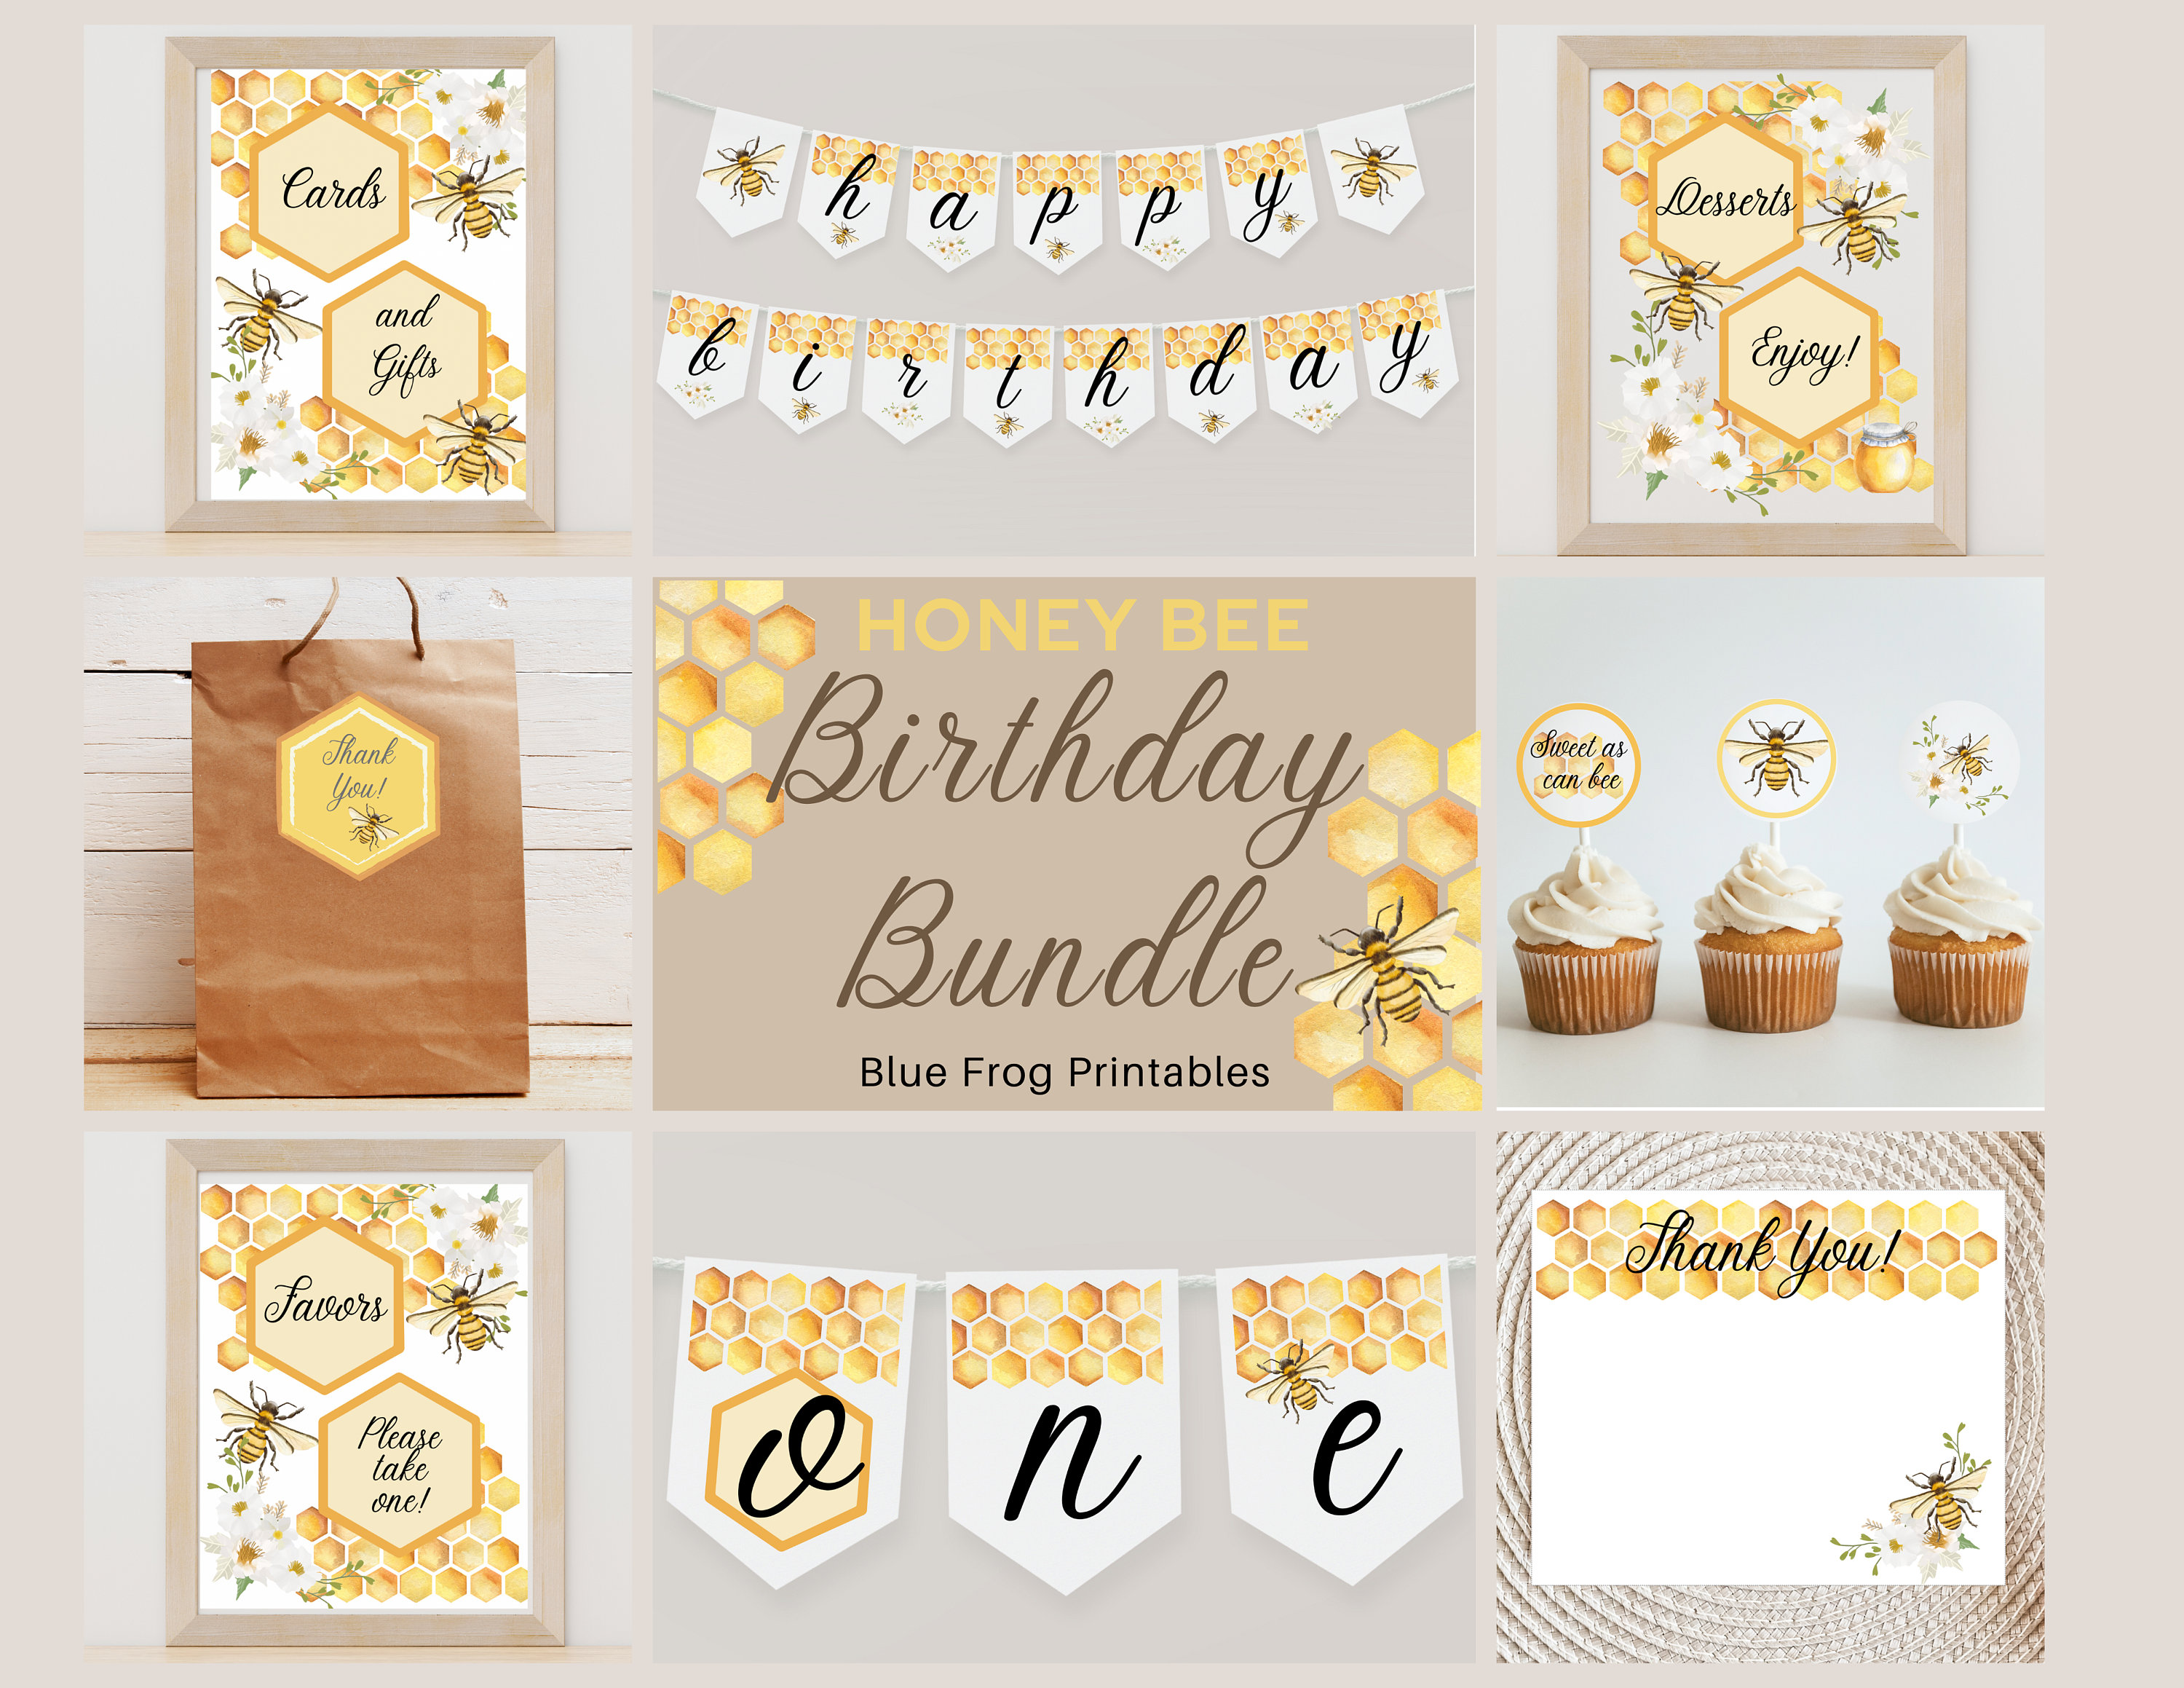 BEE Day Birthday Party Kit Bumble Bee Themed 1st Birthday, 2nd